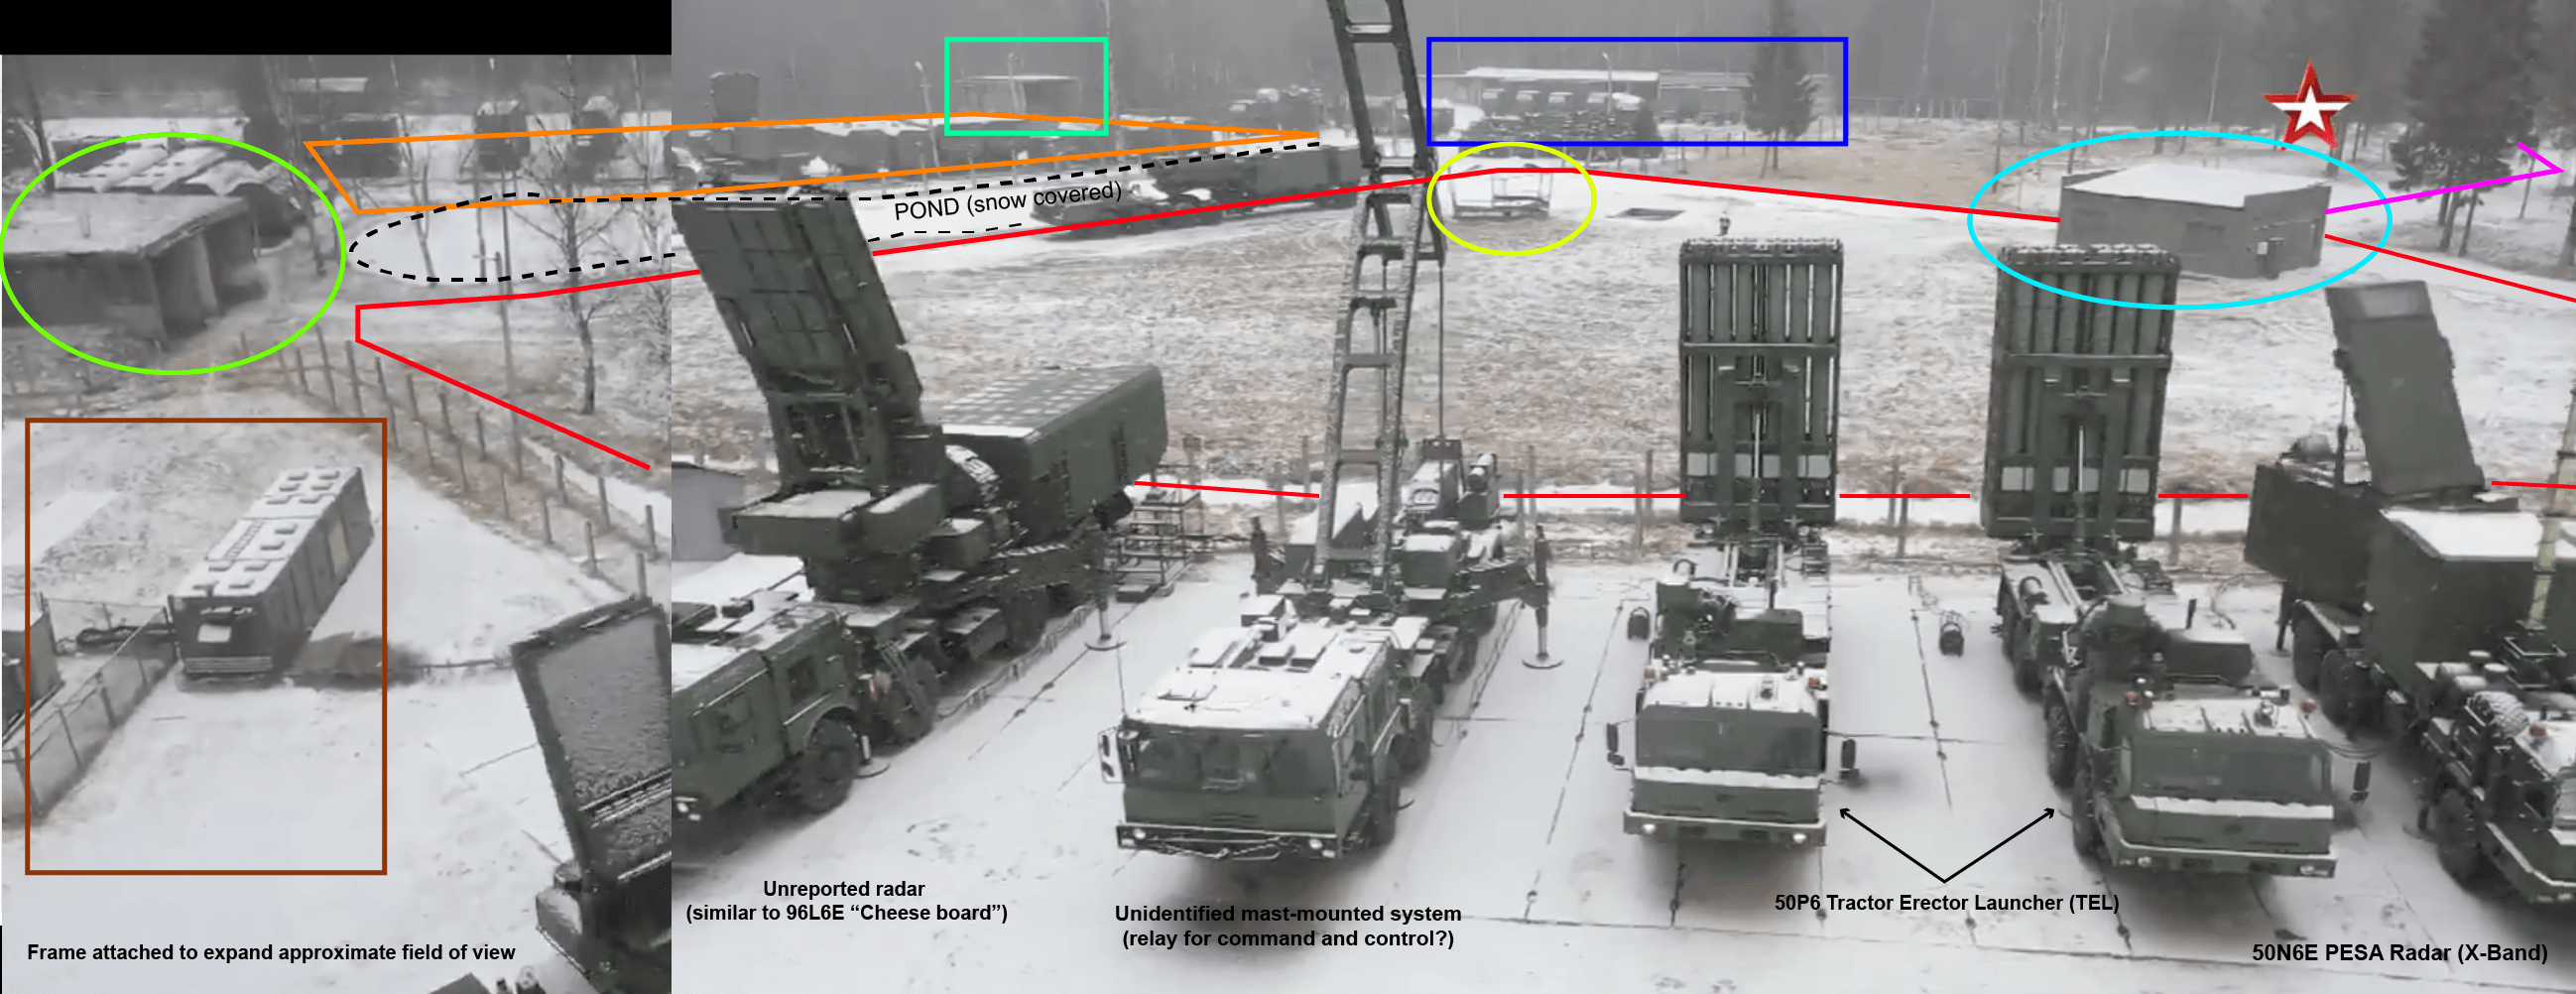 Russian Aerospace Forces Deploy New S-350 “Vityaz” SAM System near Sankt-Petersburg (Asset Recognition and Geolocation)